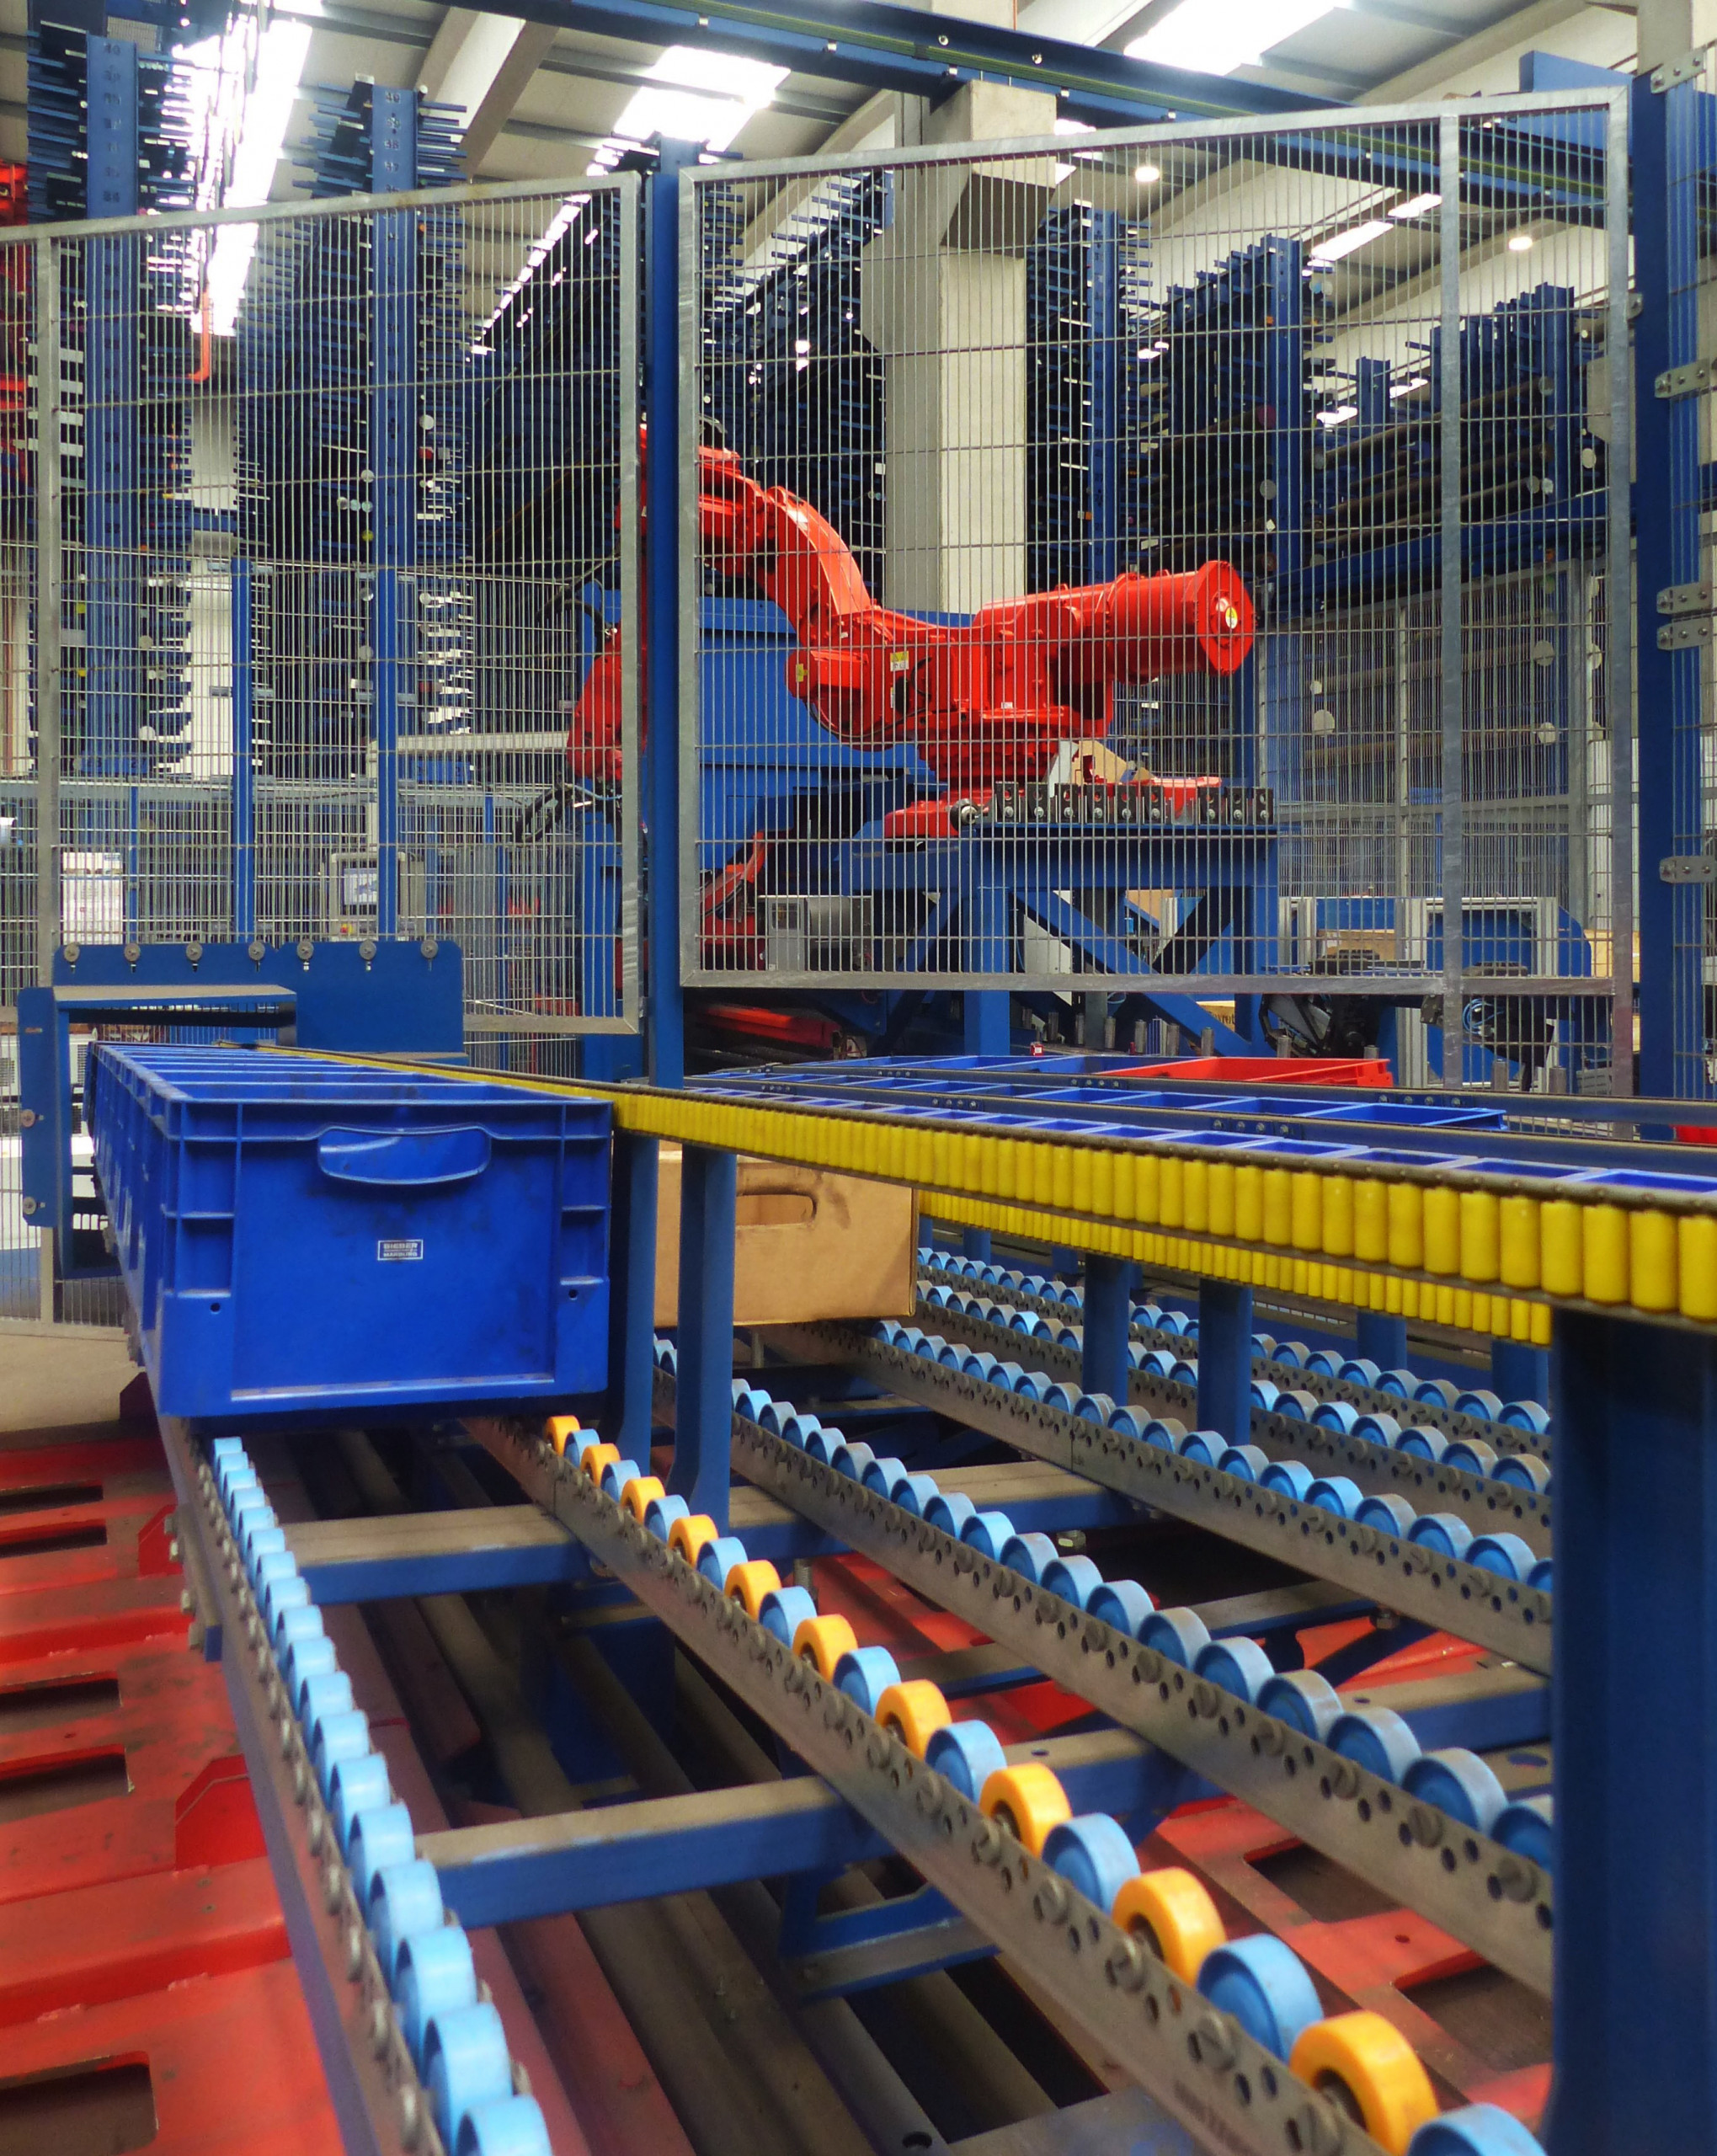 A KASTOsort robot is connected to the fully automatic production circular saw KASTOvariospeed, which takes over the container management: Eight pallet positions on a carousel change automatically, the robot grips the pallets independently and loads them. ©Kasto